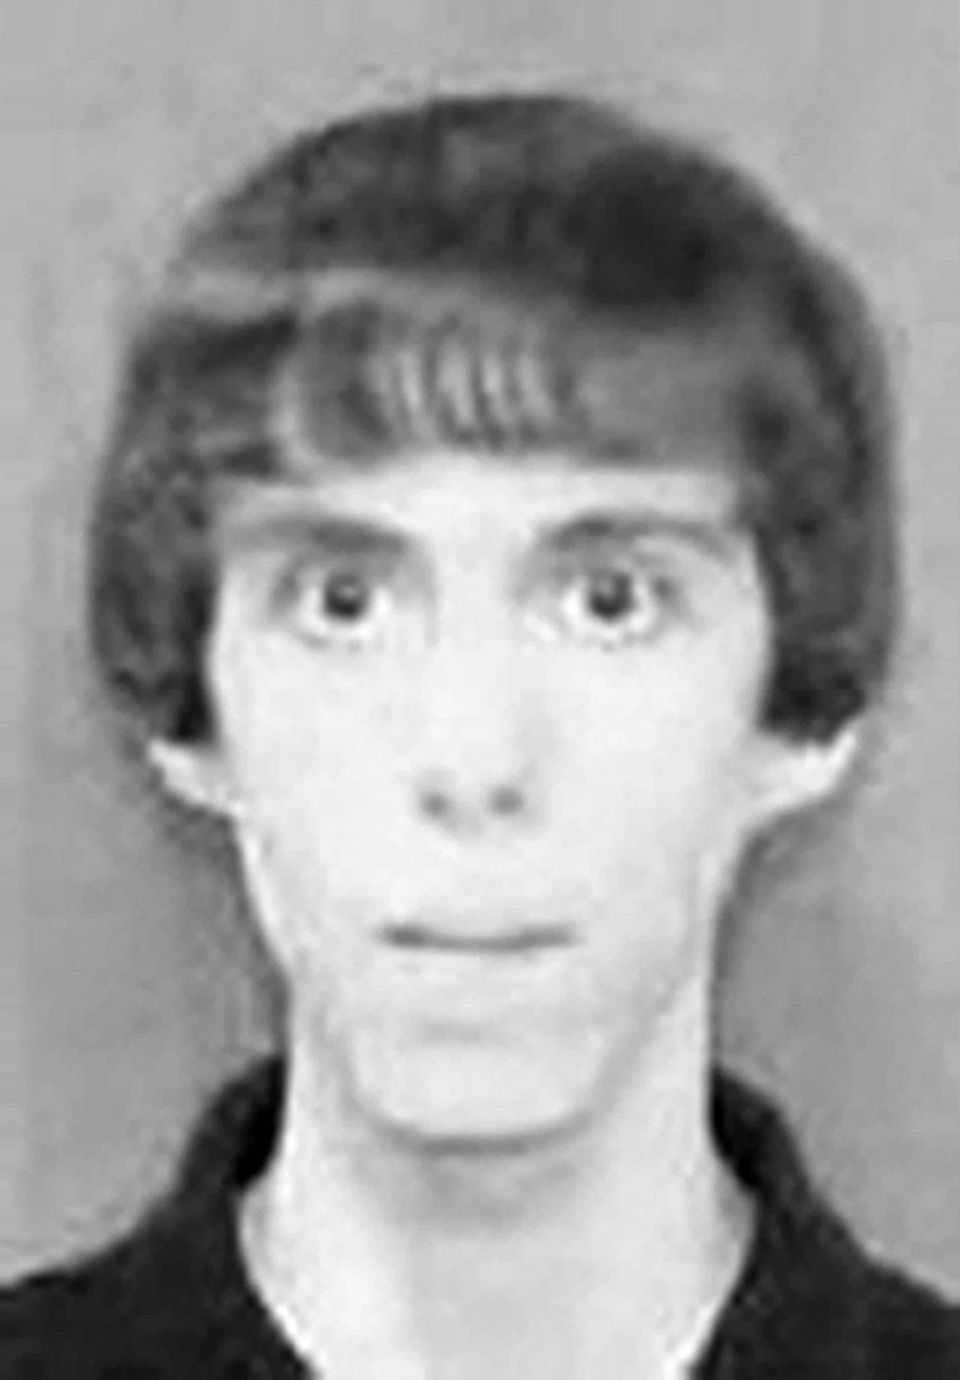 The Sandy Hook shooter: 20-year-old Adam Lanza